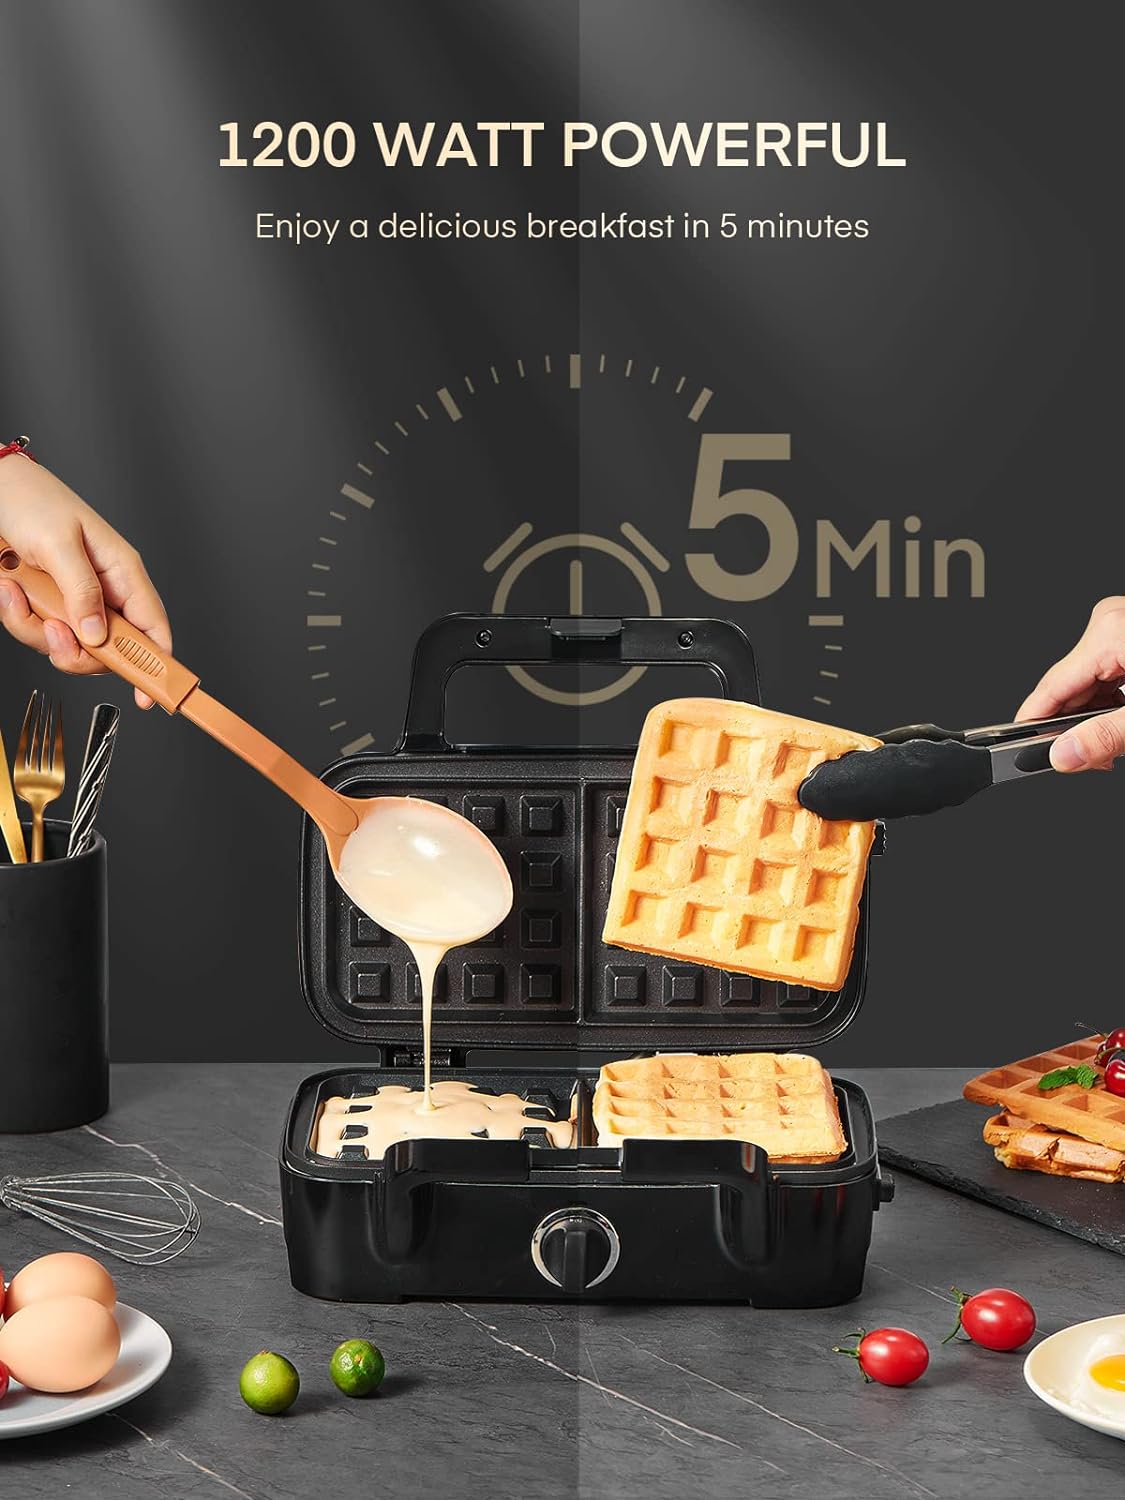 Sandwich Maker 3 in 1 Waffle Maker with Removable Plates Panini